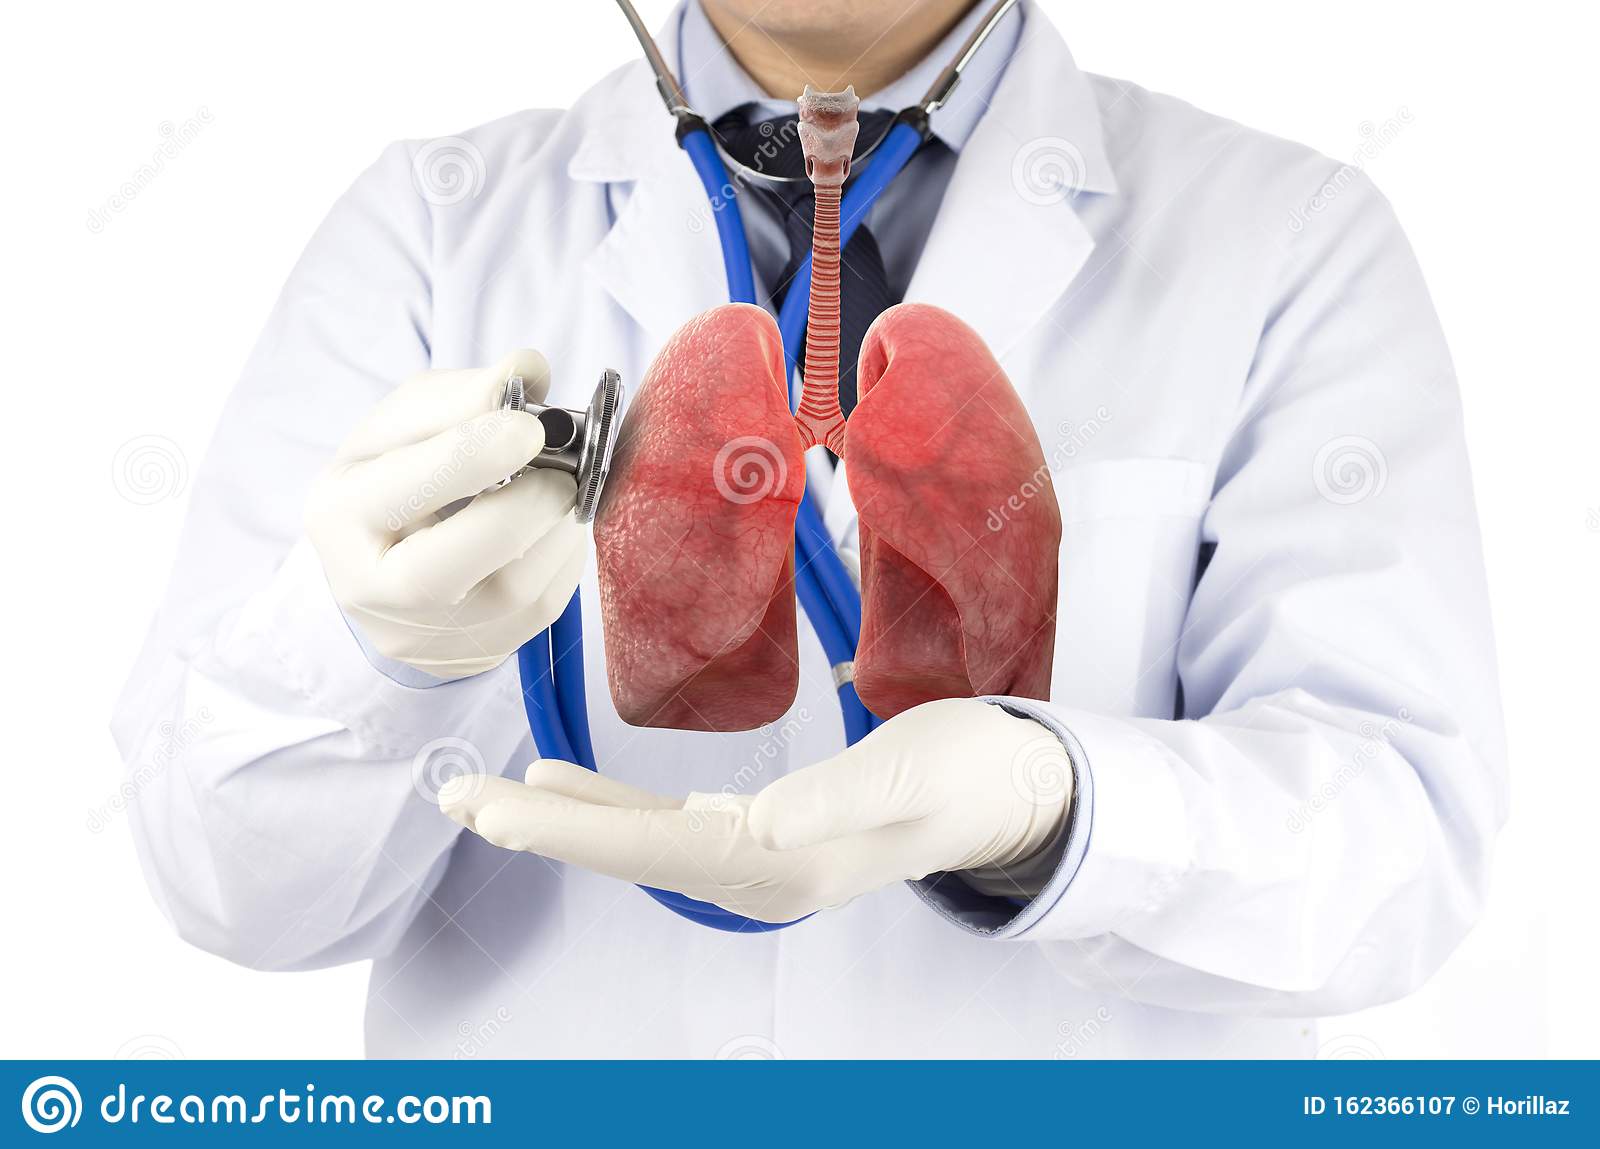 Lung health and respiratory care